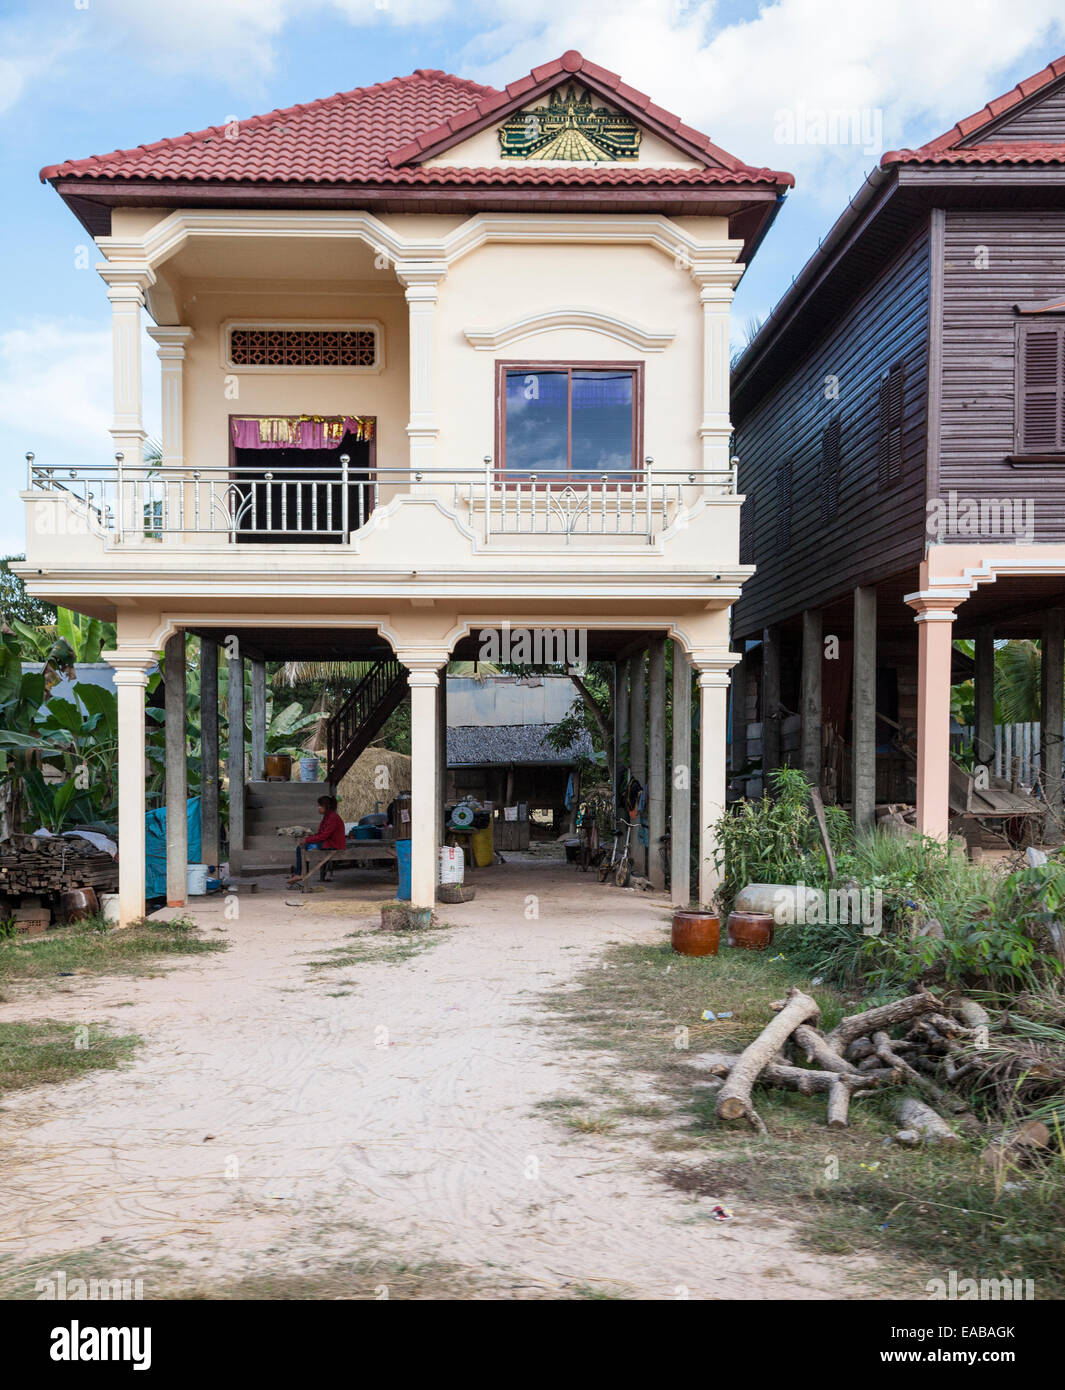 Cambodia Typical Modern Rural House With Living Quarters Above The